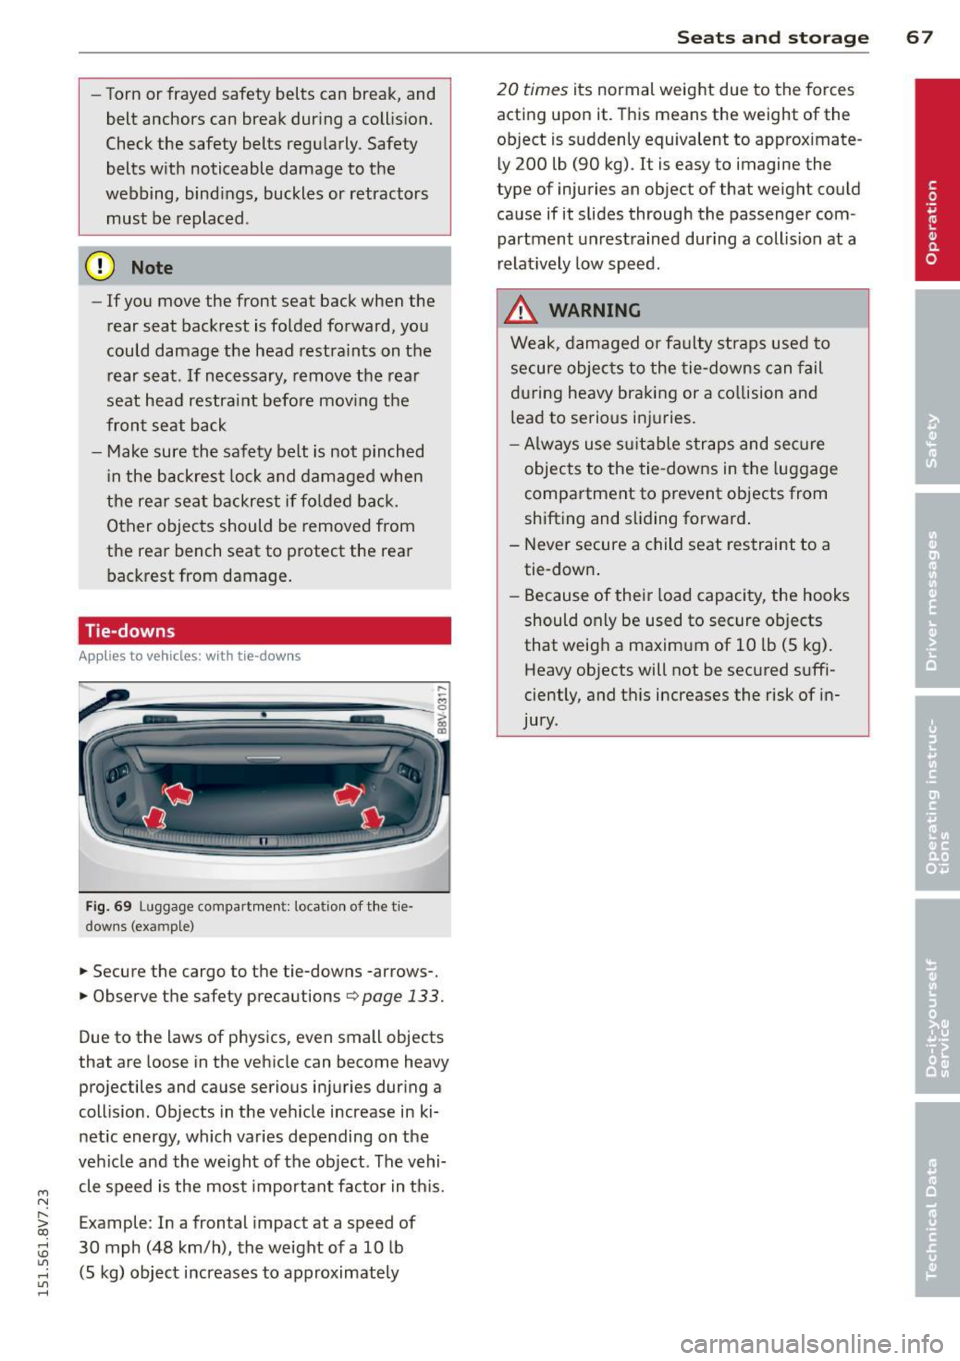 AUDI A3 CABRIOLET 2015  Owners Manual ...., 
N 
r--. > co 
rl I.O 
" rl 
" rl 
-Torn  or frayed  safety  belts  can  break,  and 
belt  anchors  can  break  dur ing  a  coll is ion. 
Check the  safety  belts  regularly.  Safety 
belts  